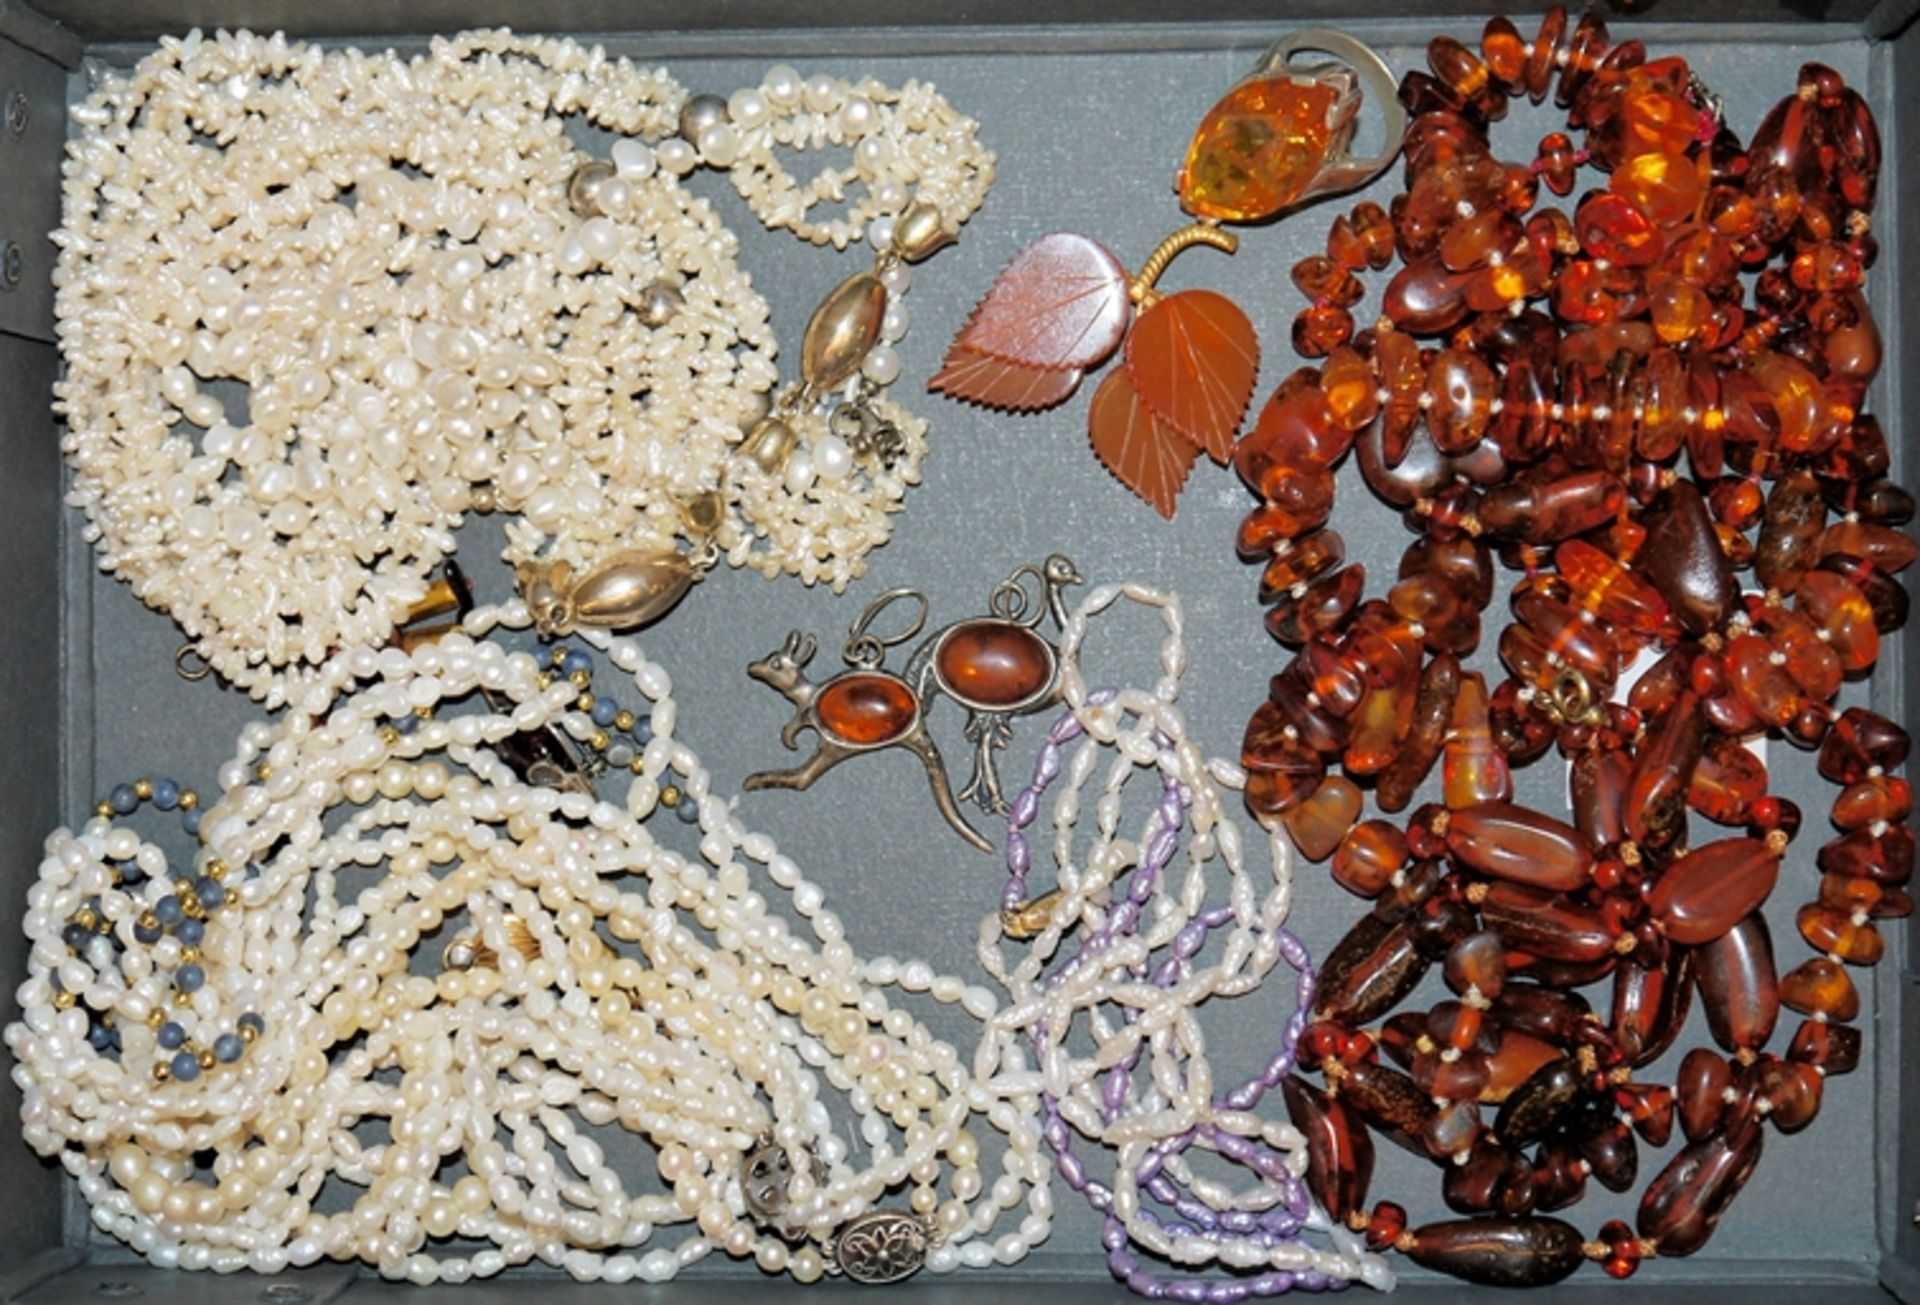 Collection of pearl necklaces and amber jewellery